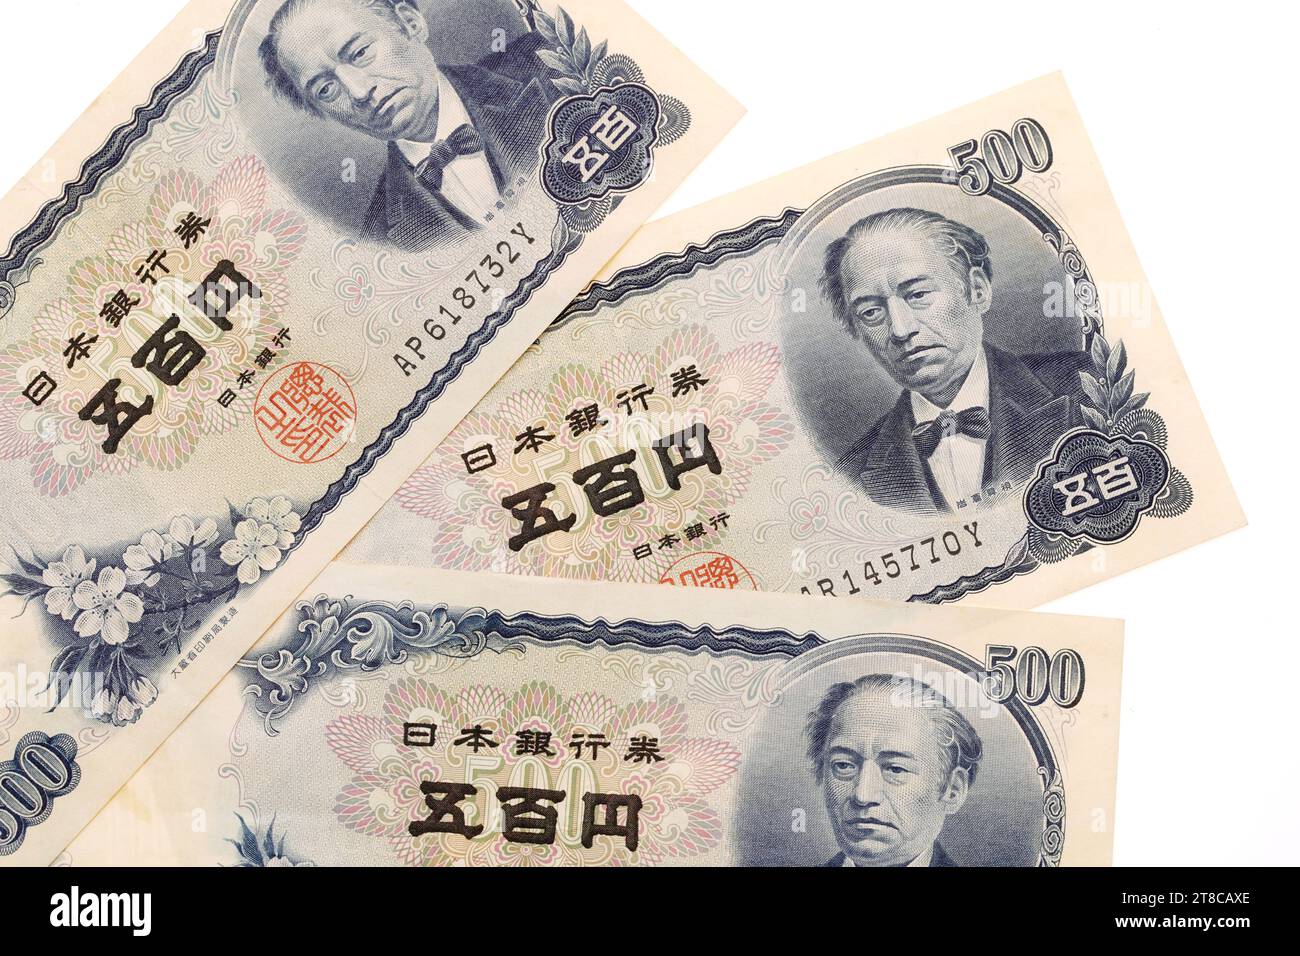 Rare five hundred japanese yen bill that is no longer in circulation Stock Photo